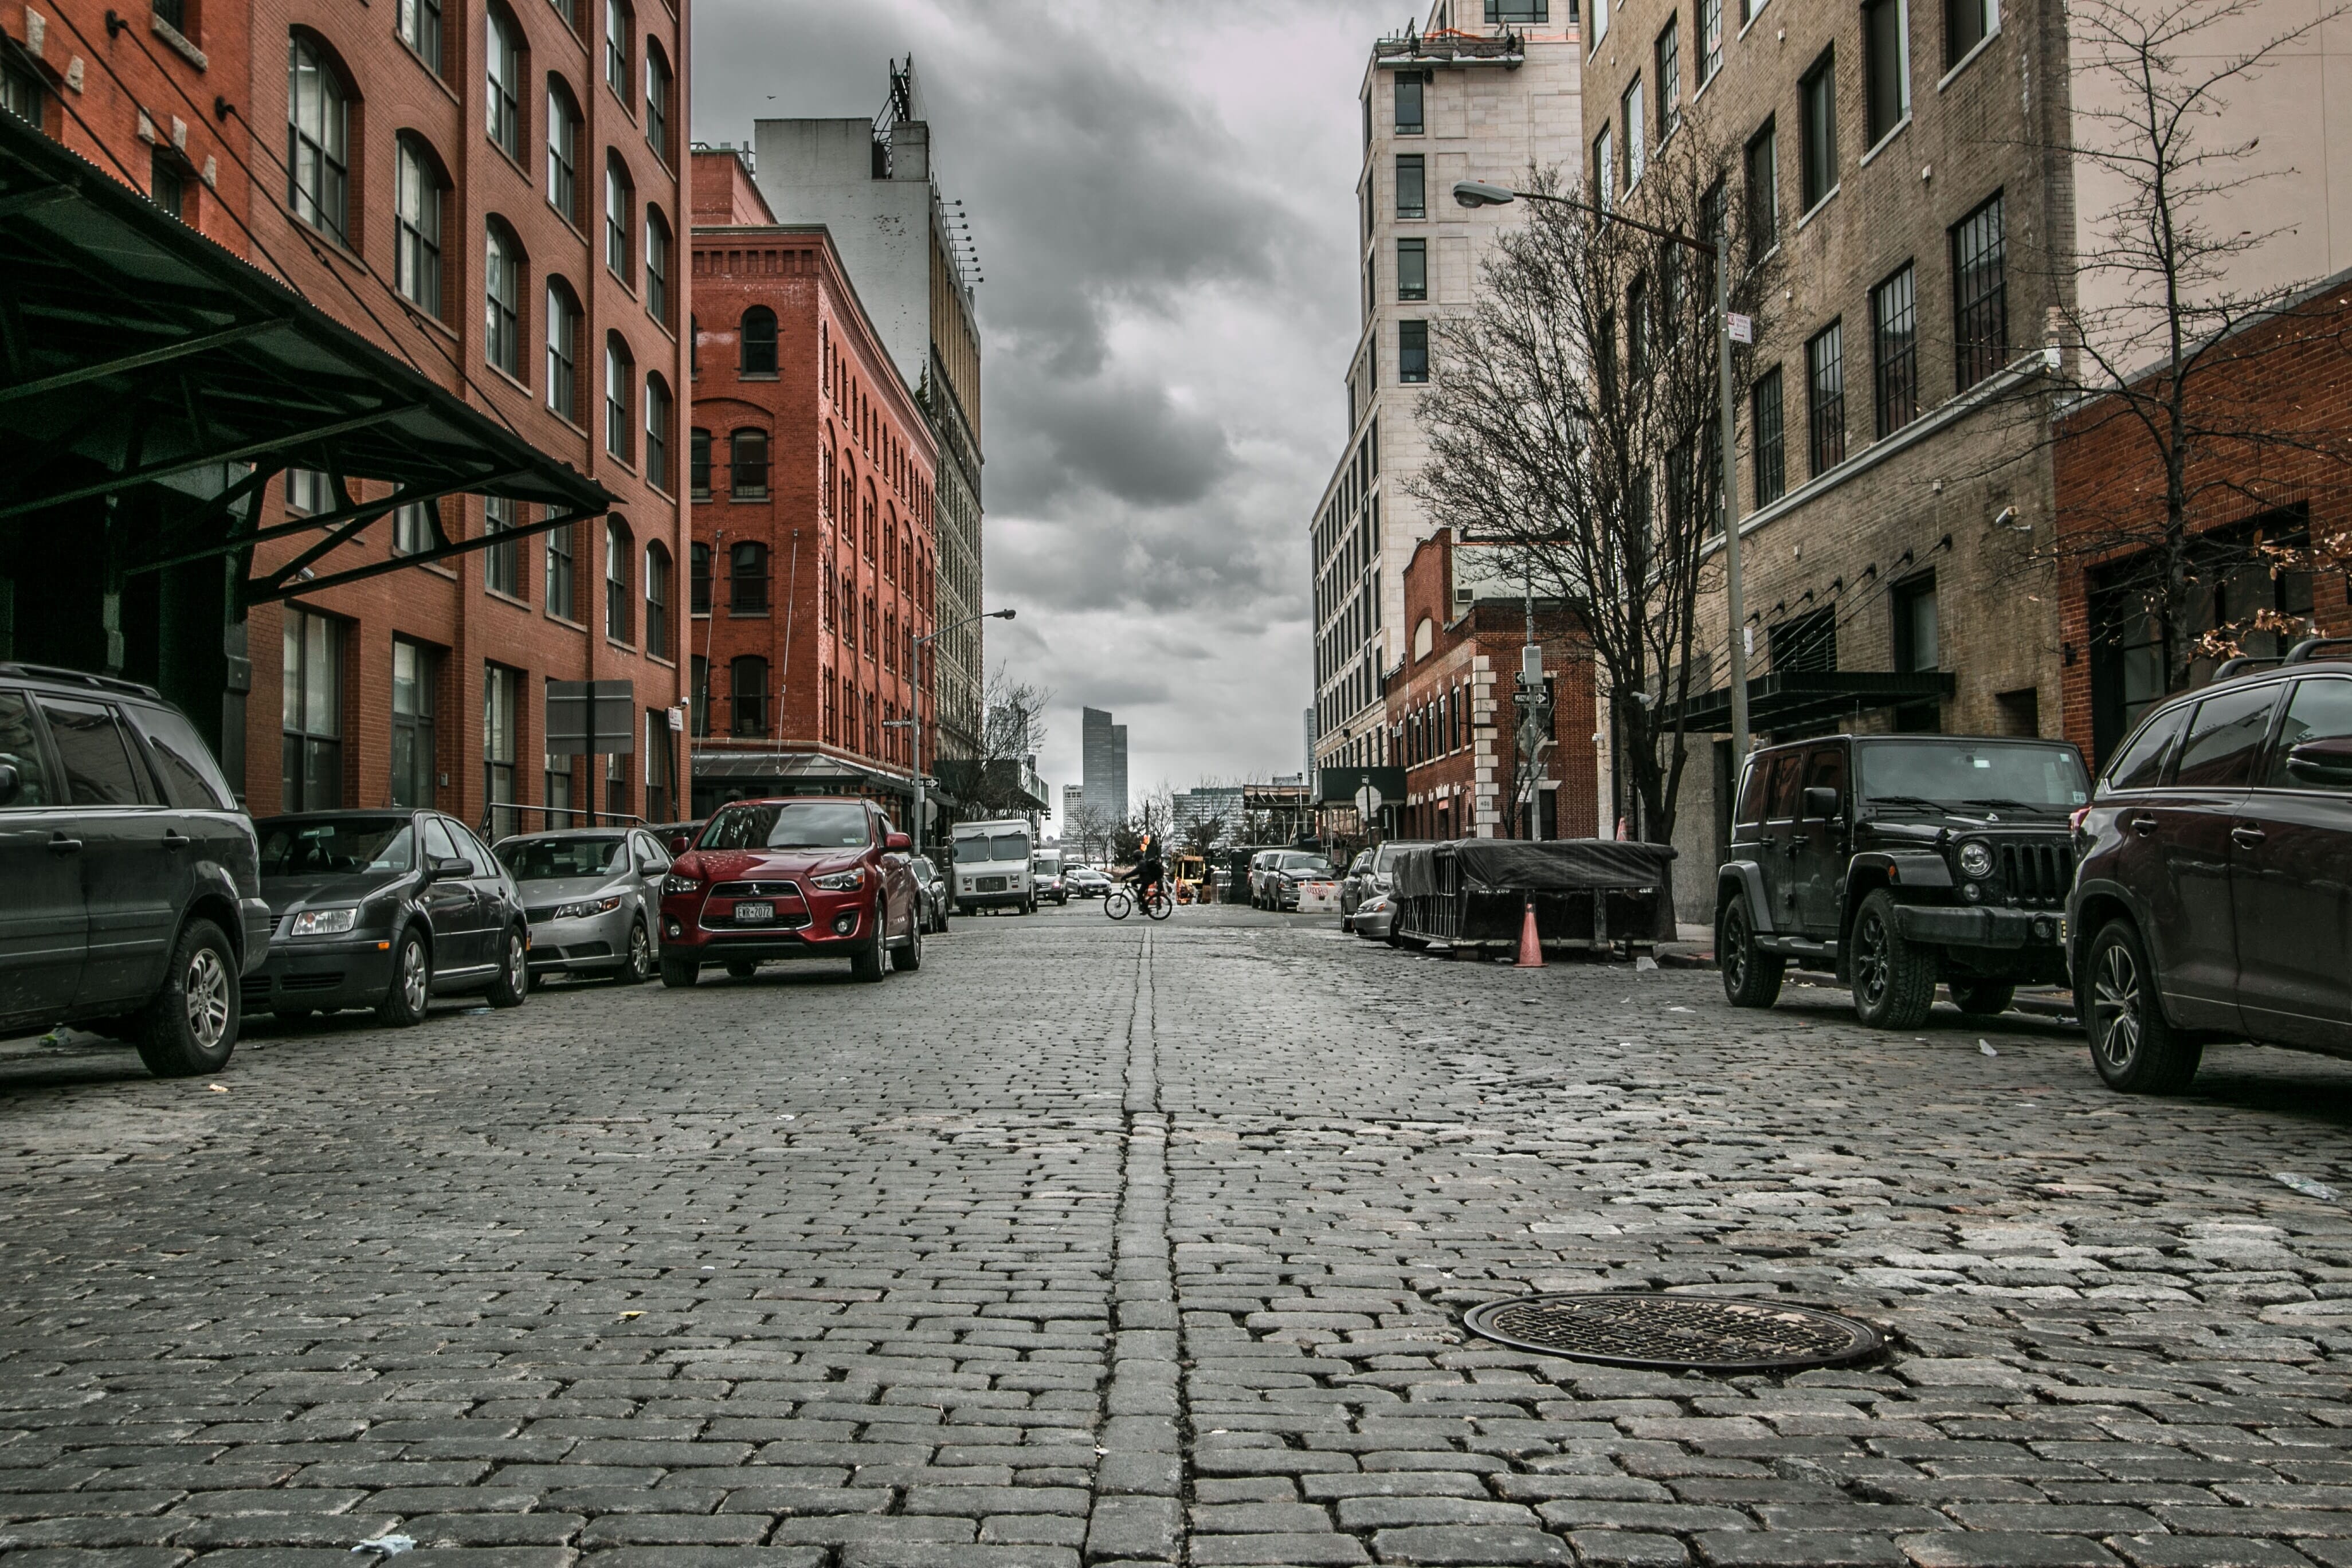 A street with cobblestones and lined with cars underneath stormy clouds.